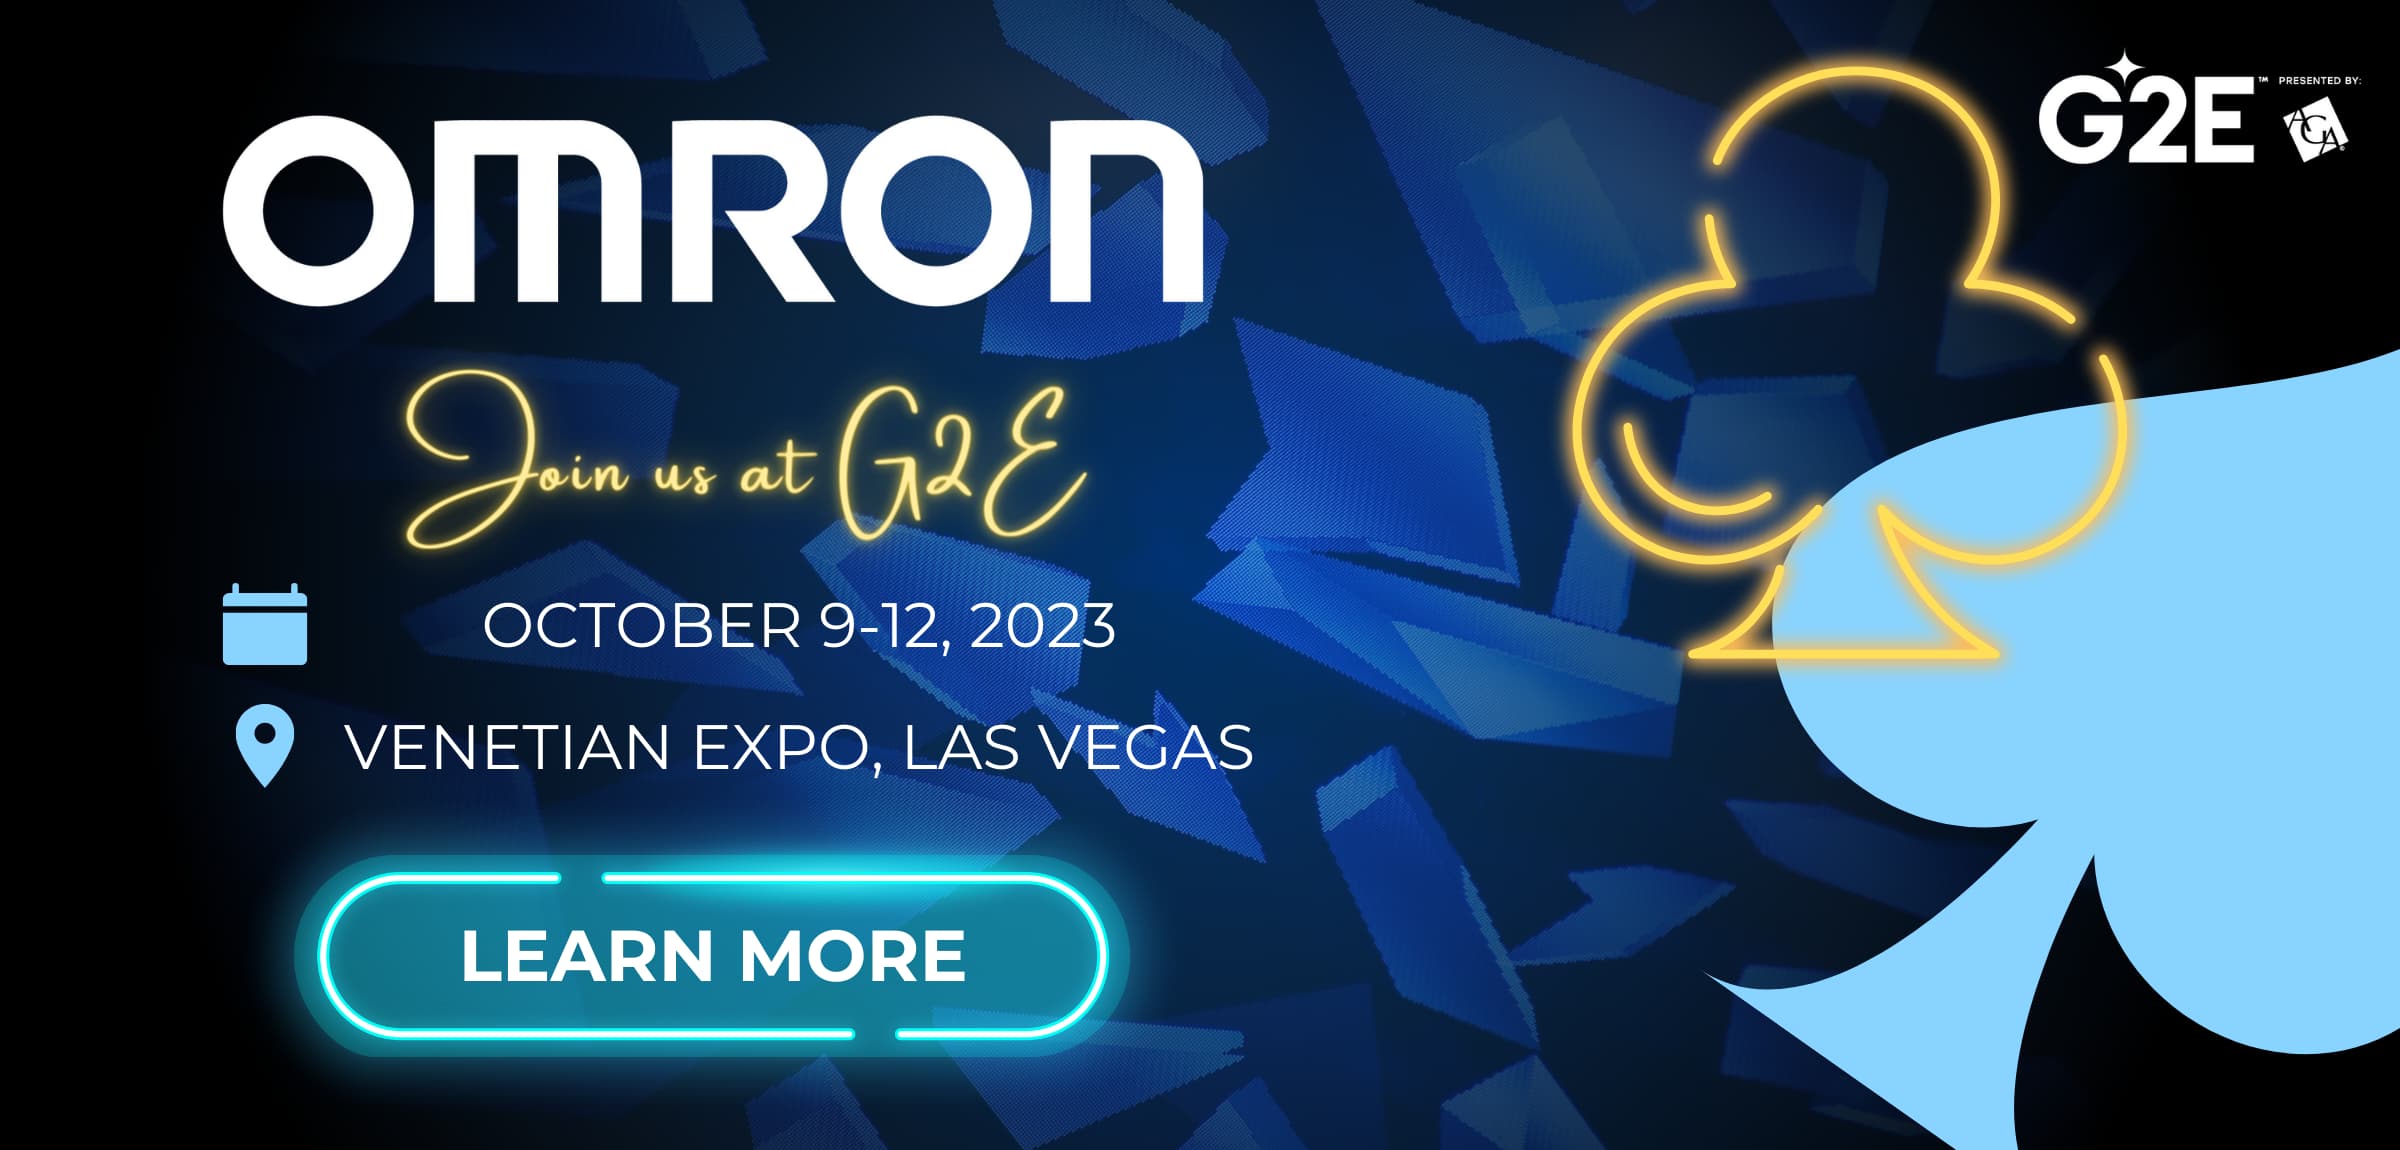 OMRON Join us at G2E OCTOBER 9-12, 2023 VENETIAN EXPO, LAS VEGAS LEARN MORE